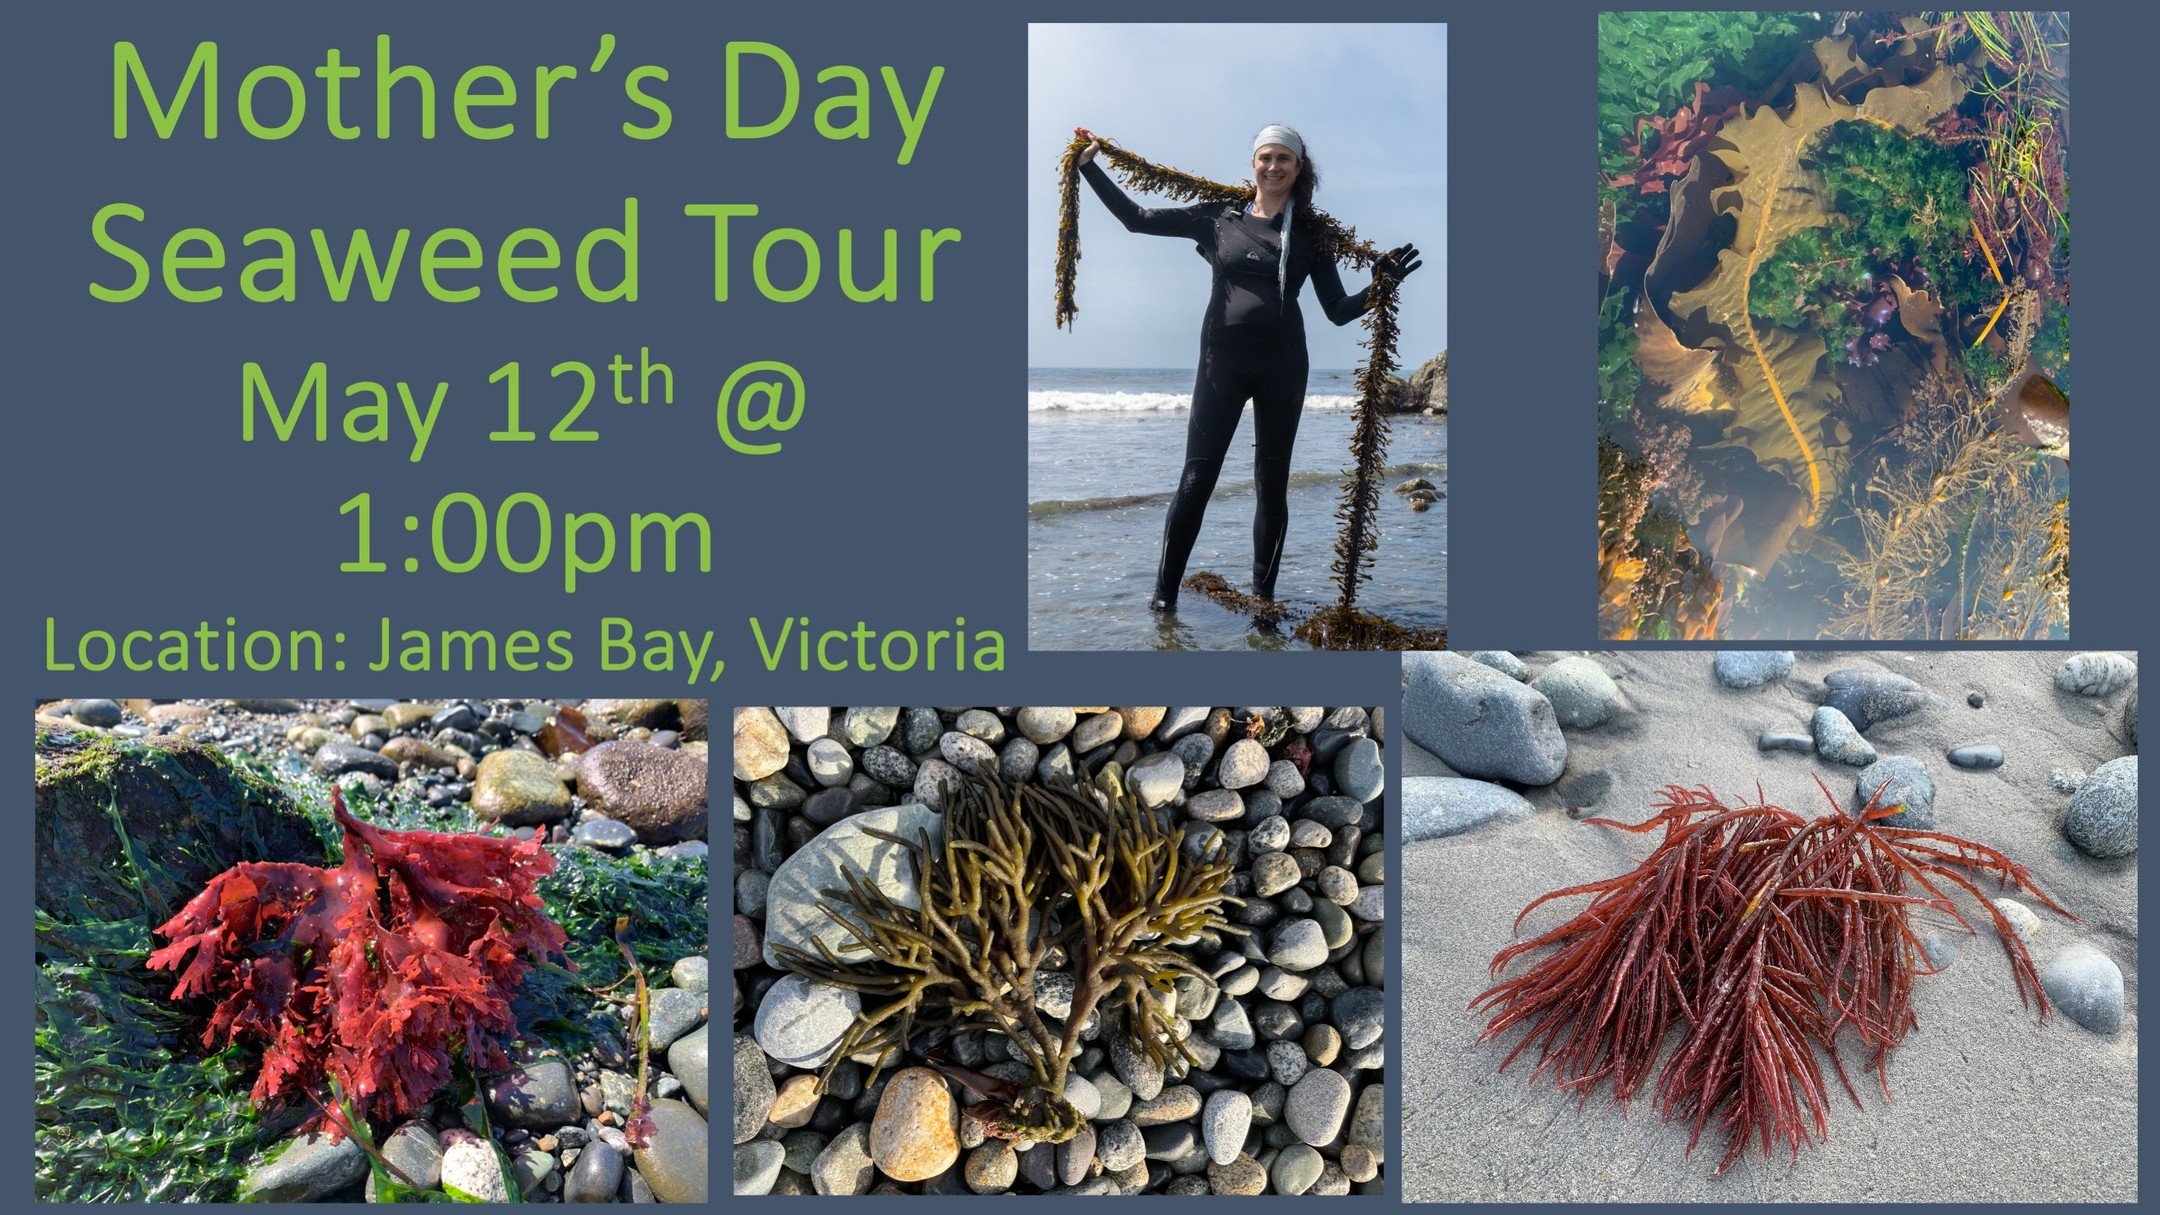 Over the years I have had many mother-daughter duos attend my seaweed classes. It is a special way to spend time together and a gift that can become a treasured memory. Seaweed, like moms, help protect and nourish people and the planet:) I would love